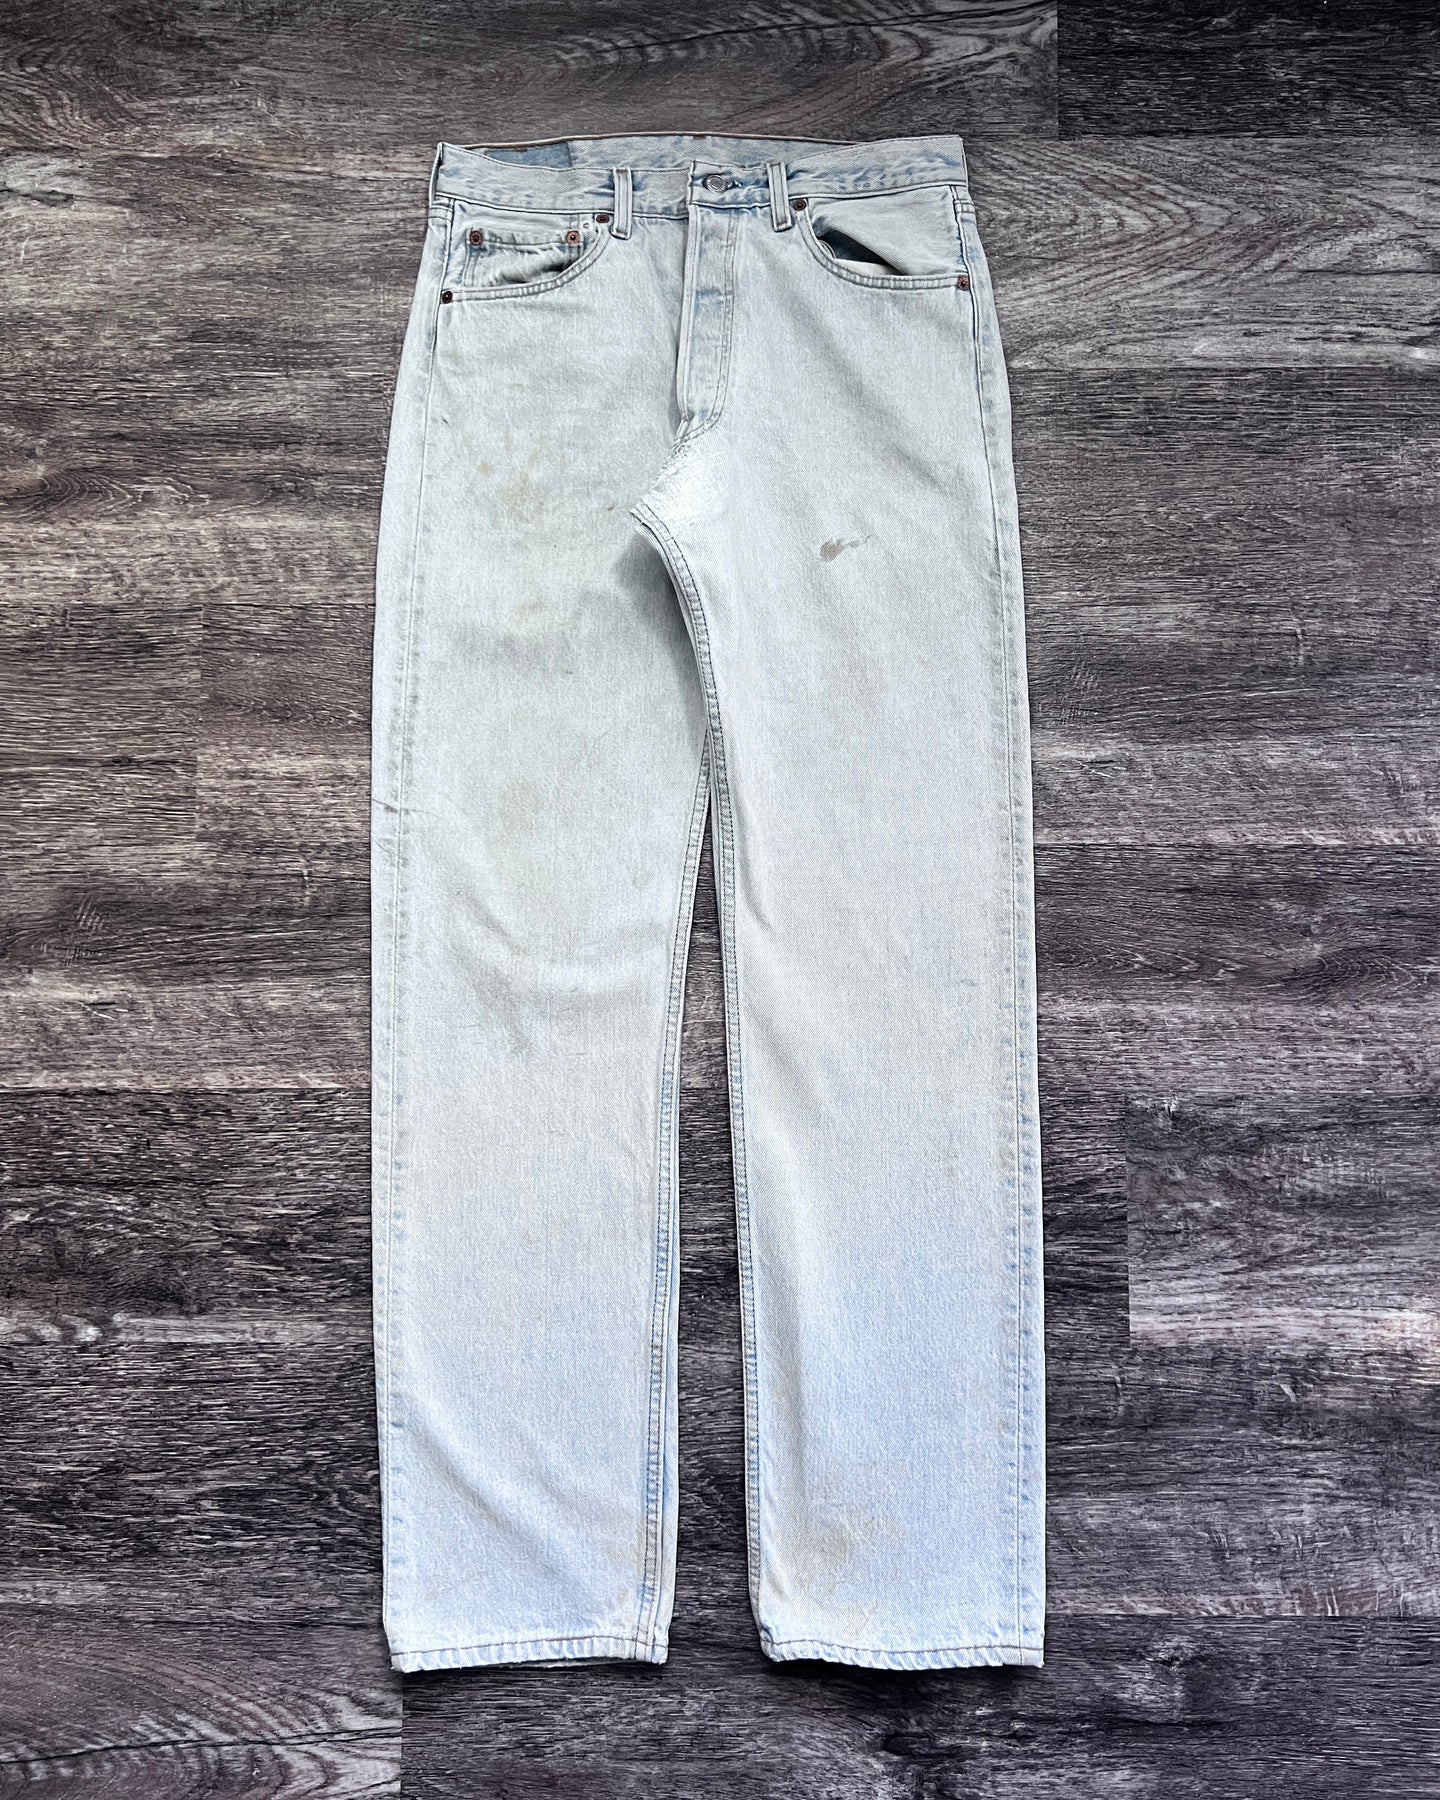 1990s Levi's Light Wash Repaired 501 - Size 31 x 33